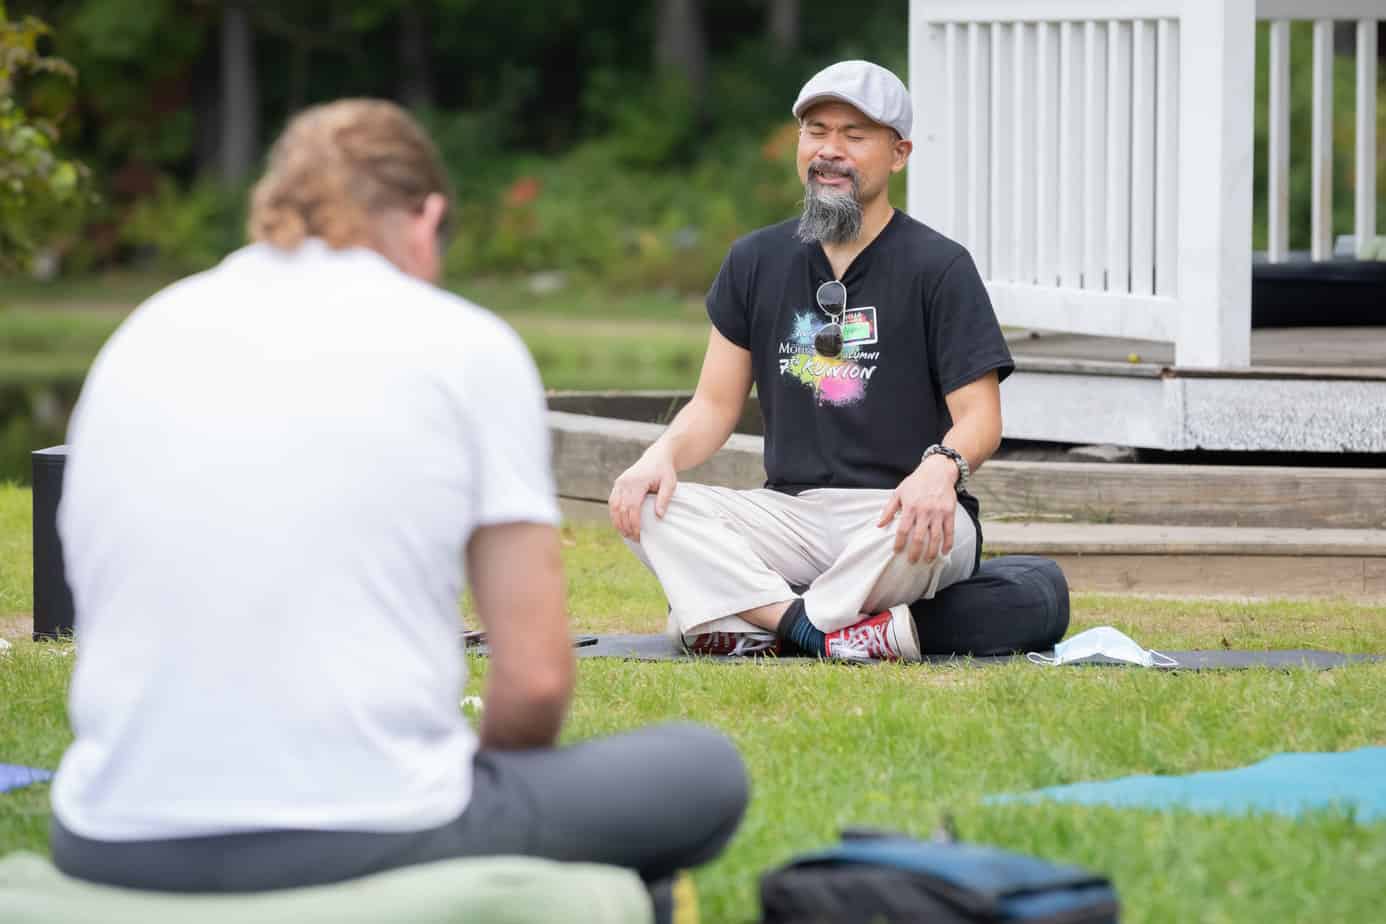 A meditation instructor on the lawn at Mountainside treatment center in CT